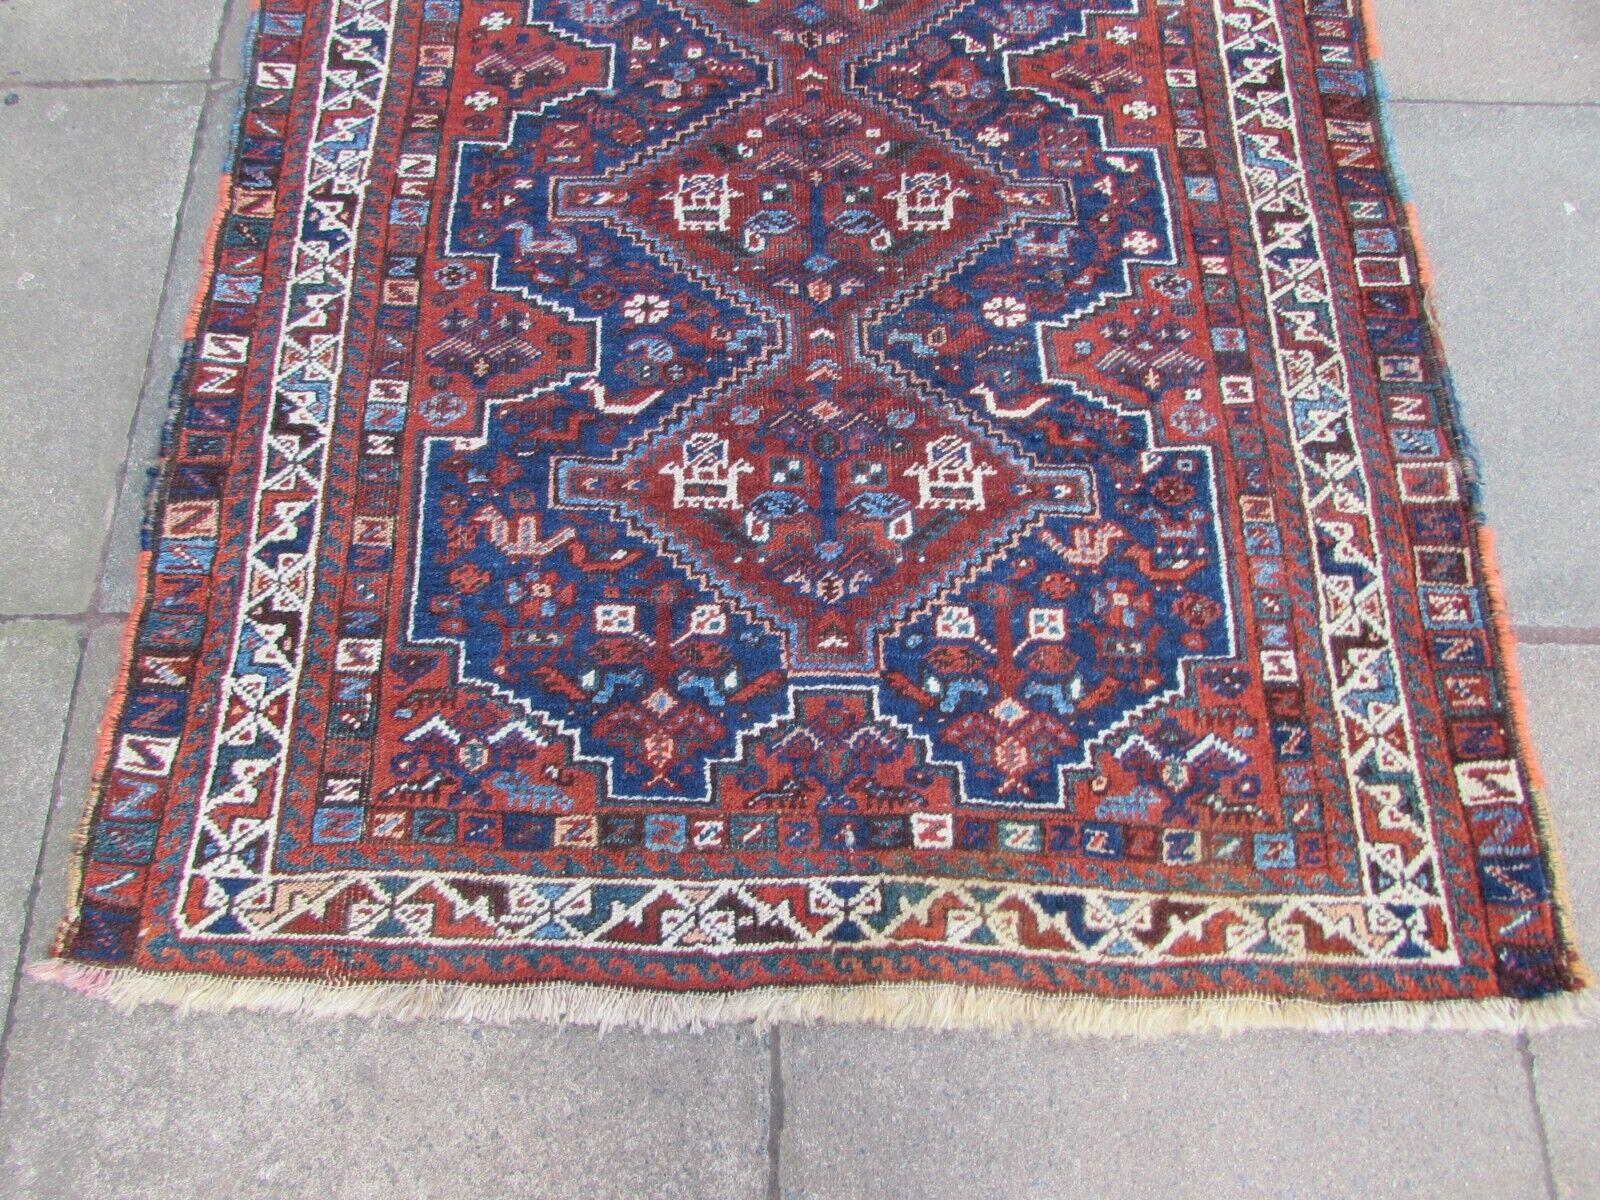 Handmade Antique Persian Style Shiraz Rug 3.9' x 4.9', 1920s, 1Q62 For Sale 2